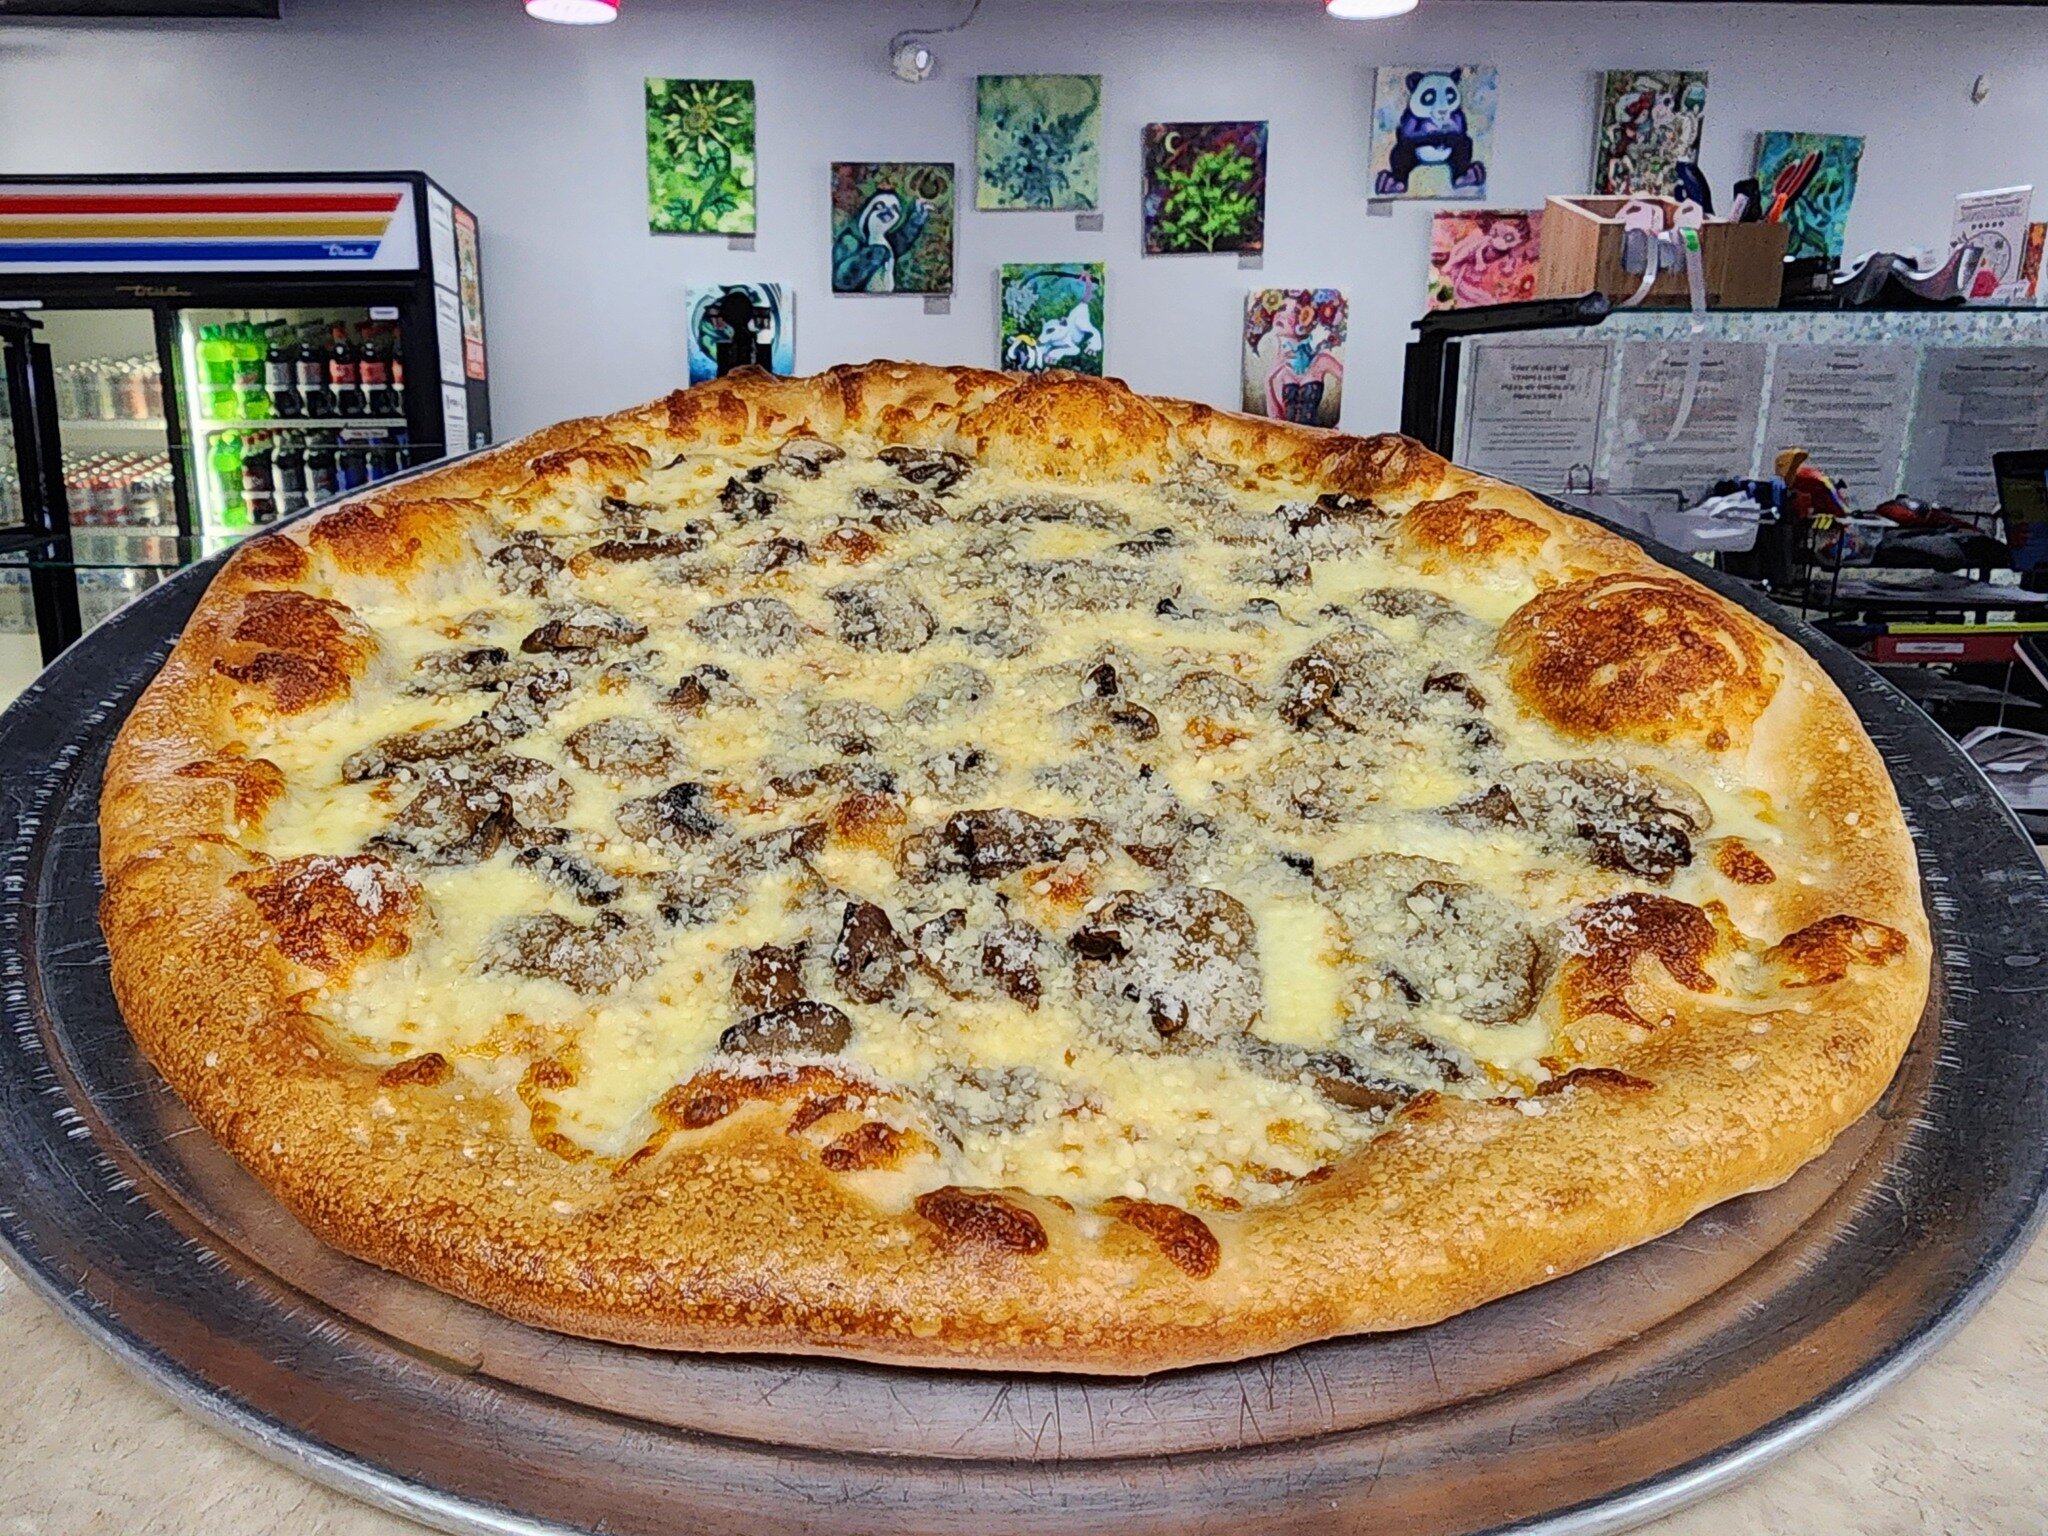 Introducing our Mucho Mushroom Pizza! We start with an Olive Oil Base, Mozzarella Cheese, Traditional Mushrooms, and Fresh Mushrooms. After the bake we top with LOTS of Parmesan Cheese. No additions/substitutions on this already-delicious pizza.

Sta